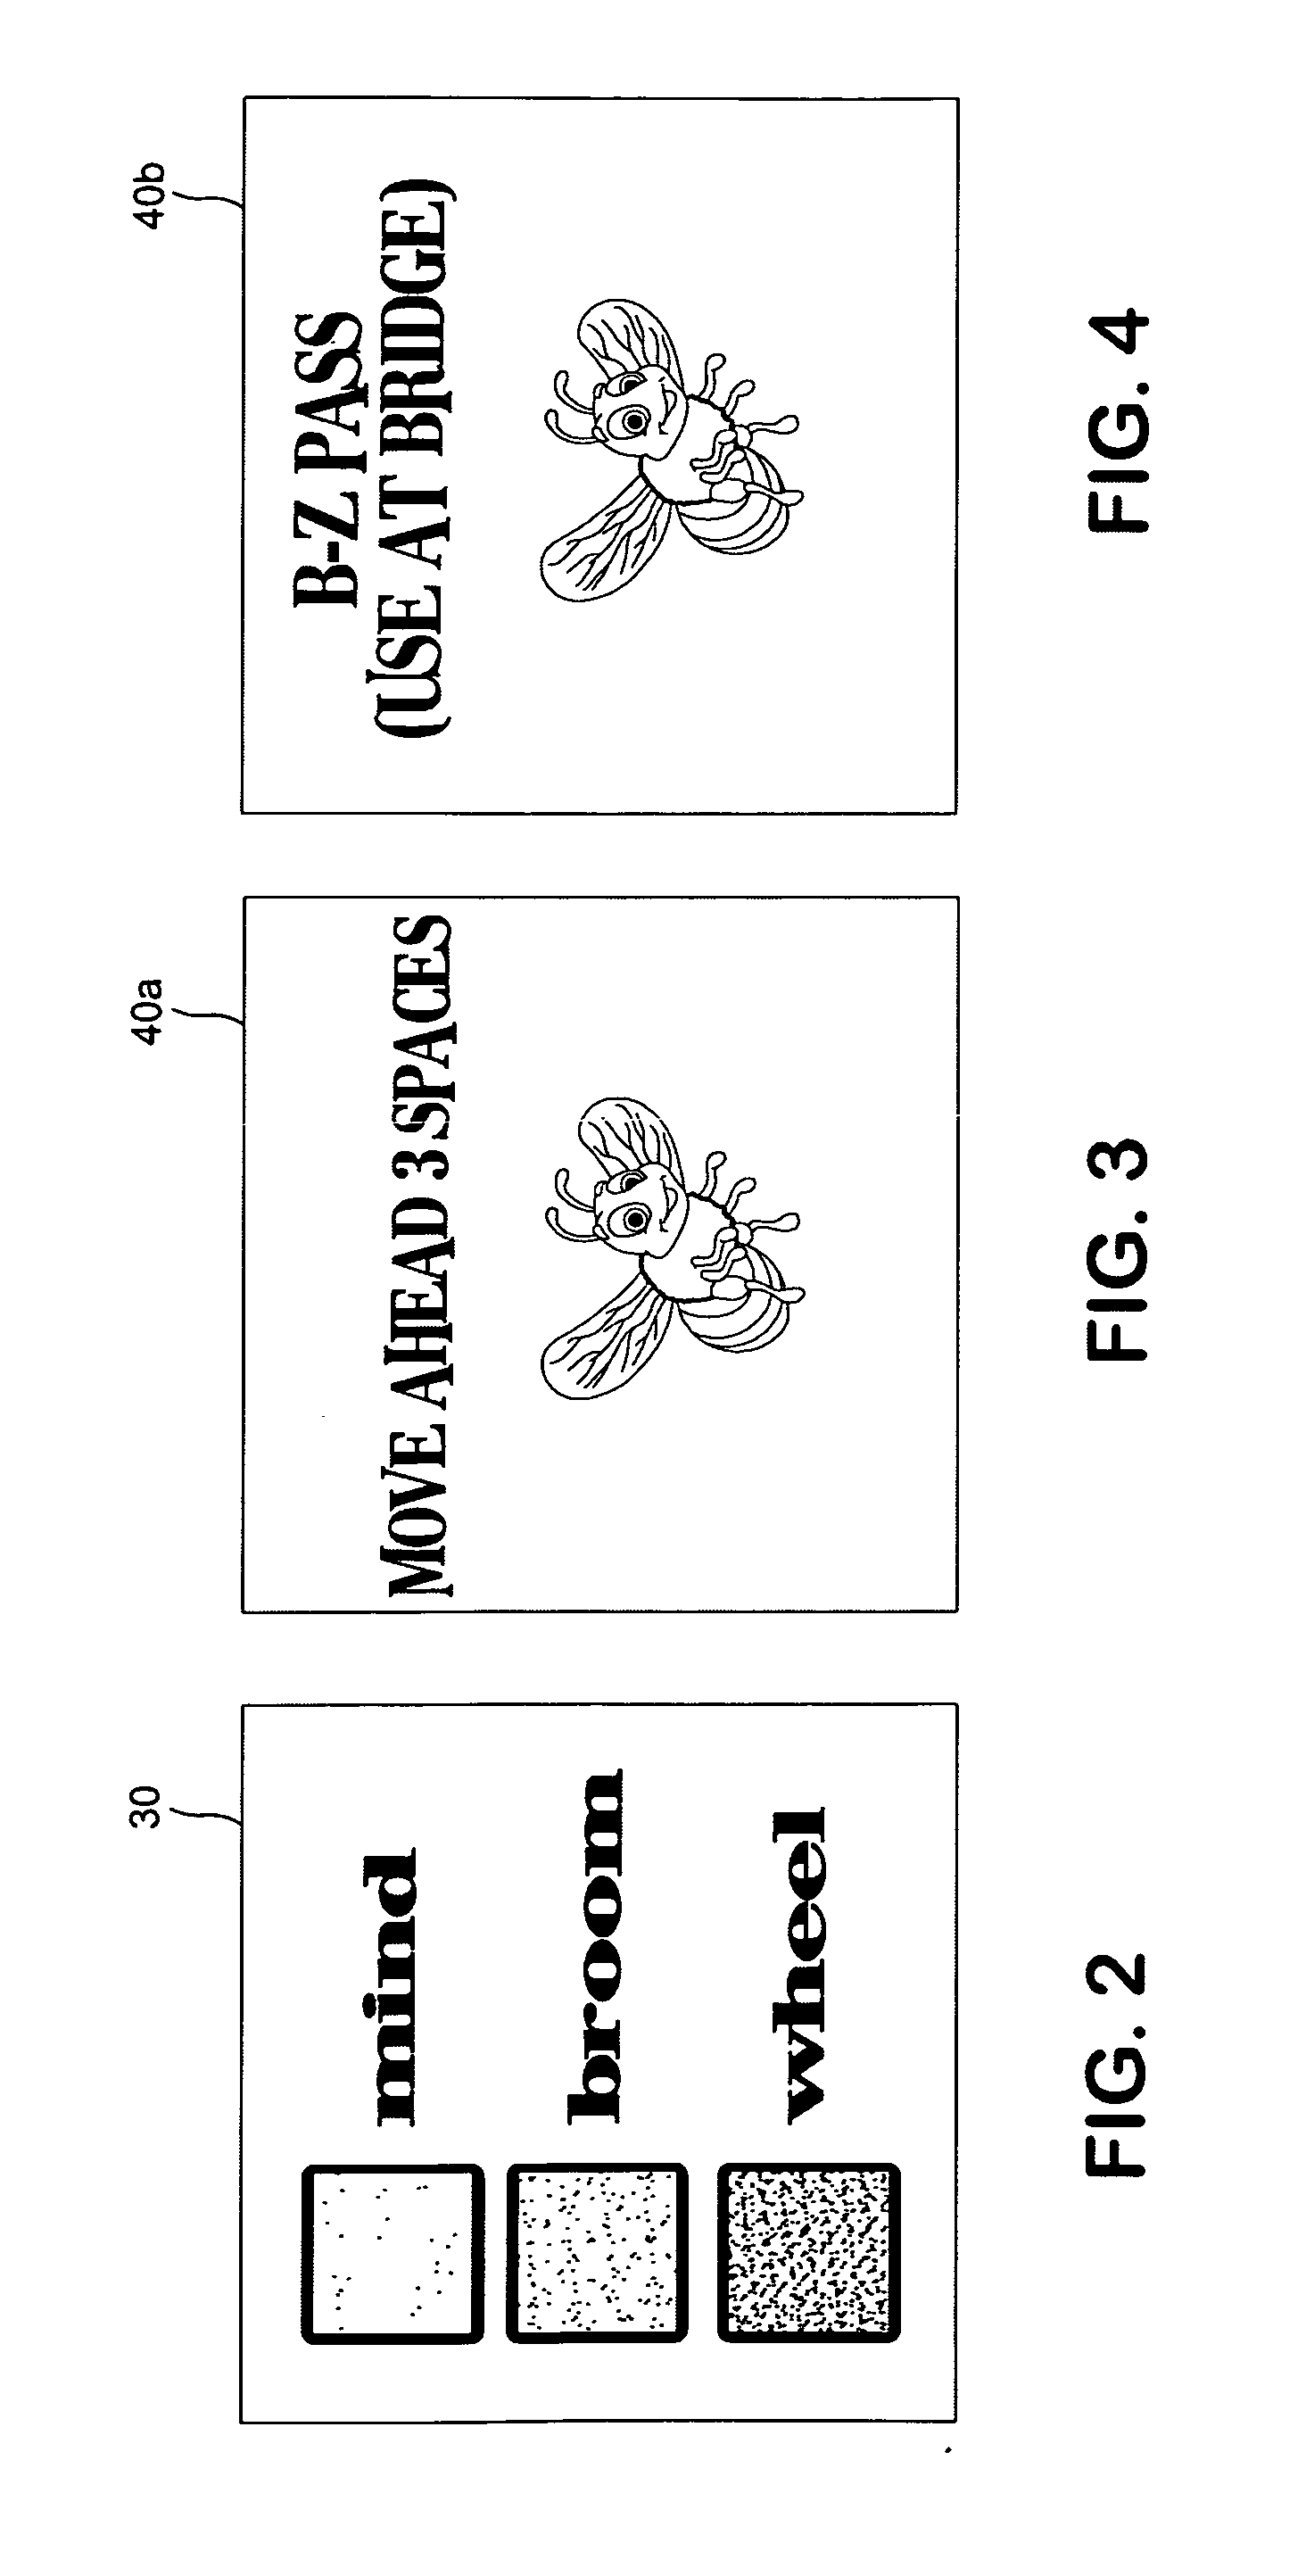 Methods and apparatus for educational spelling games